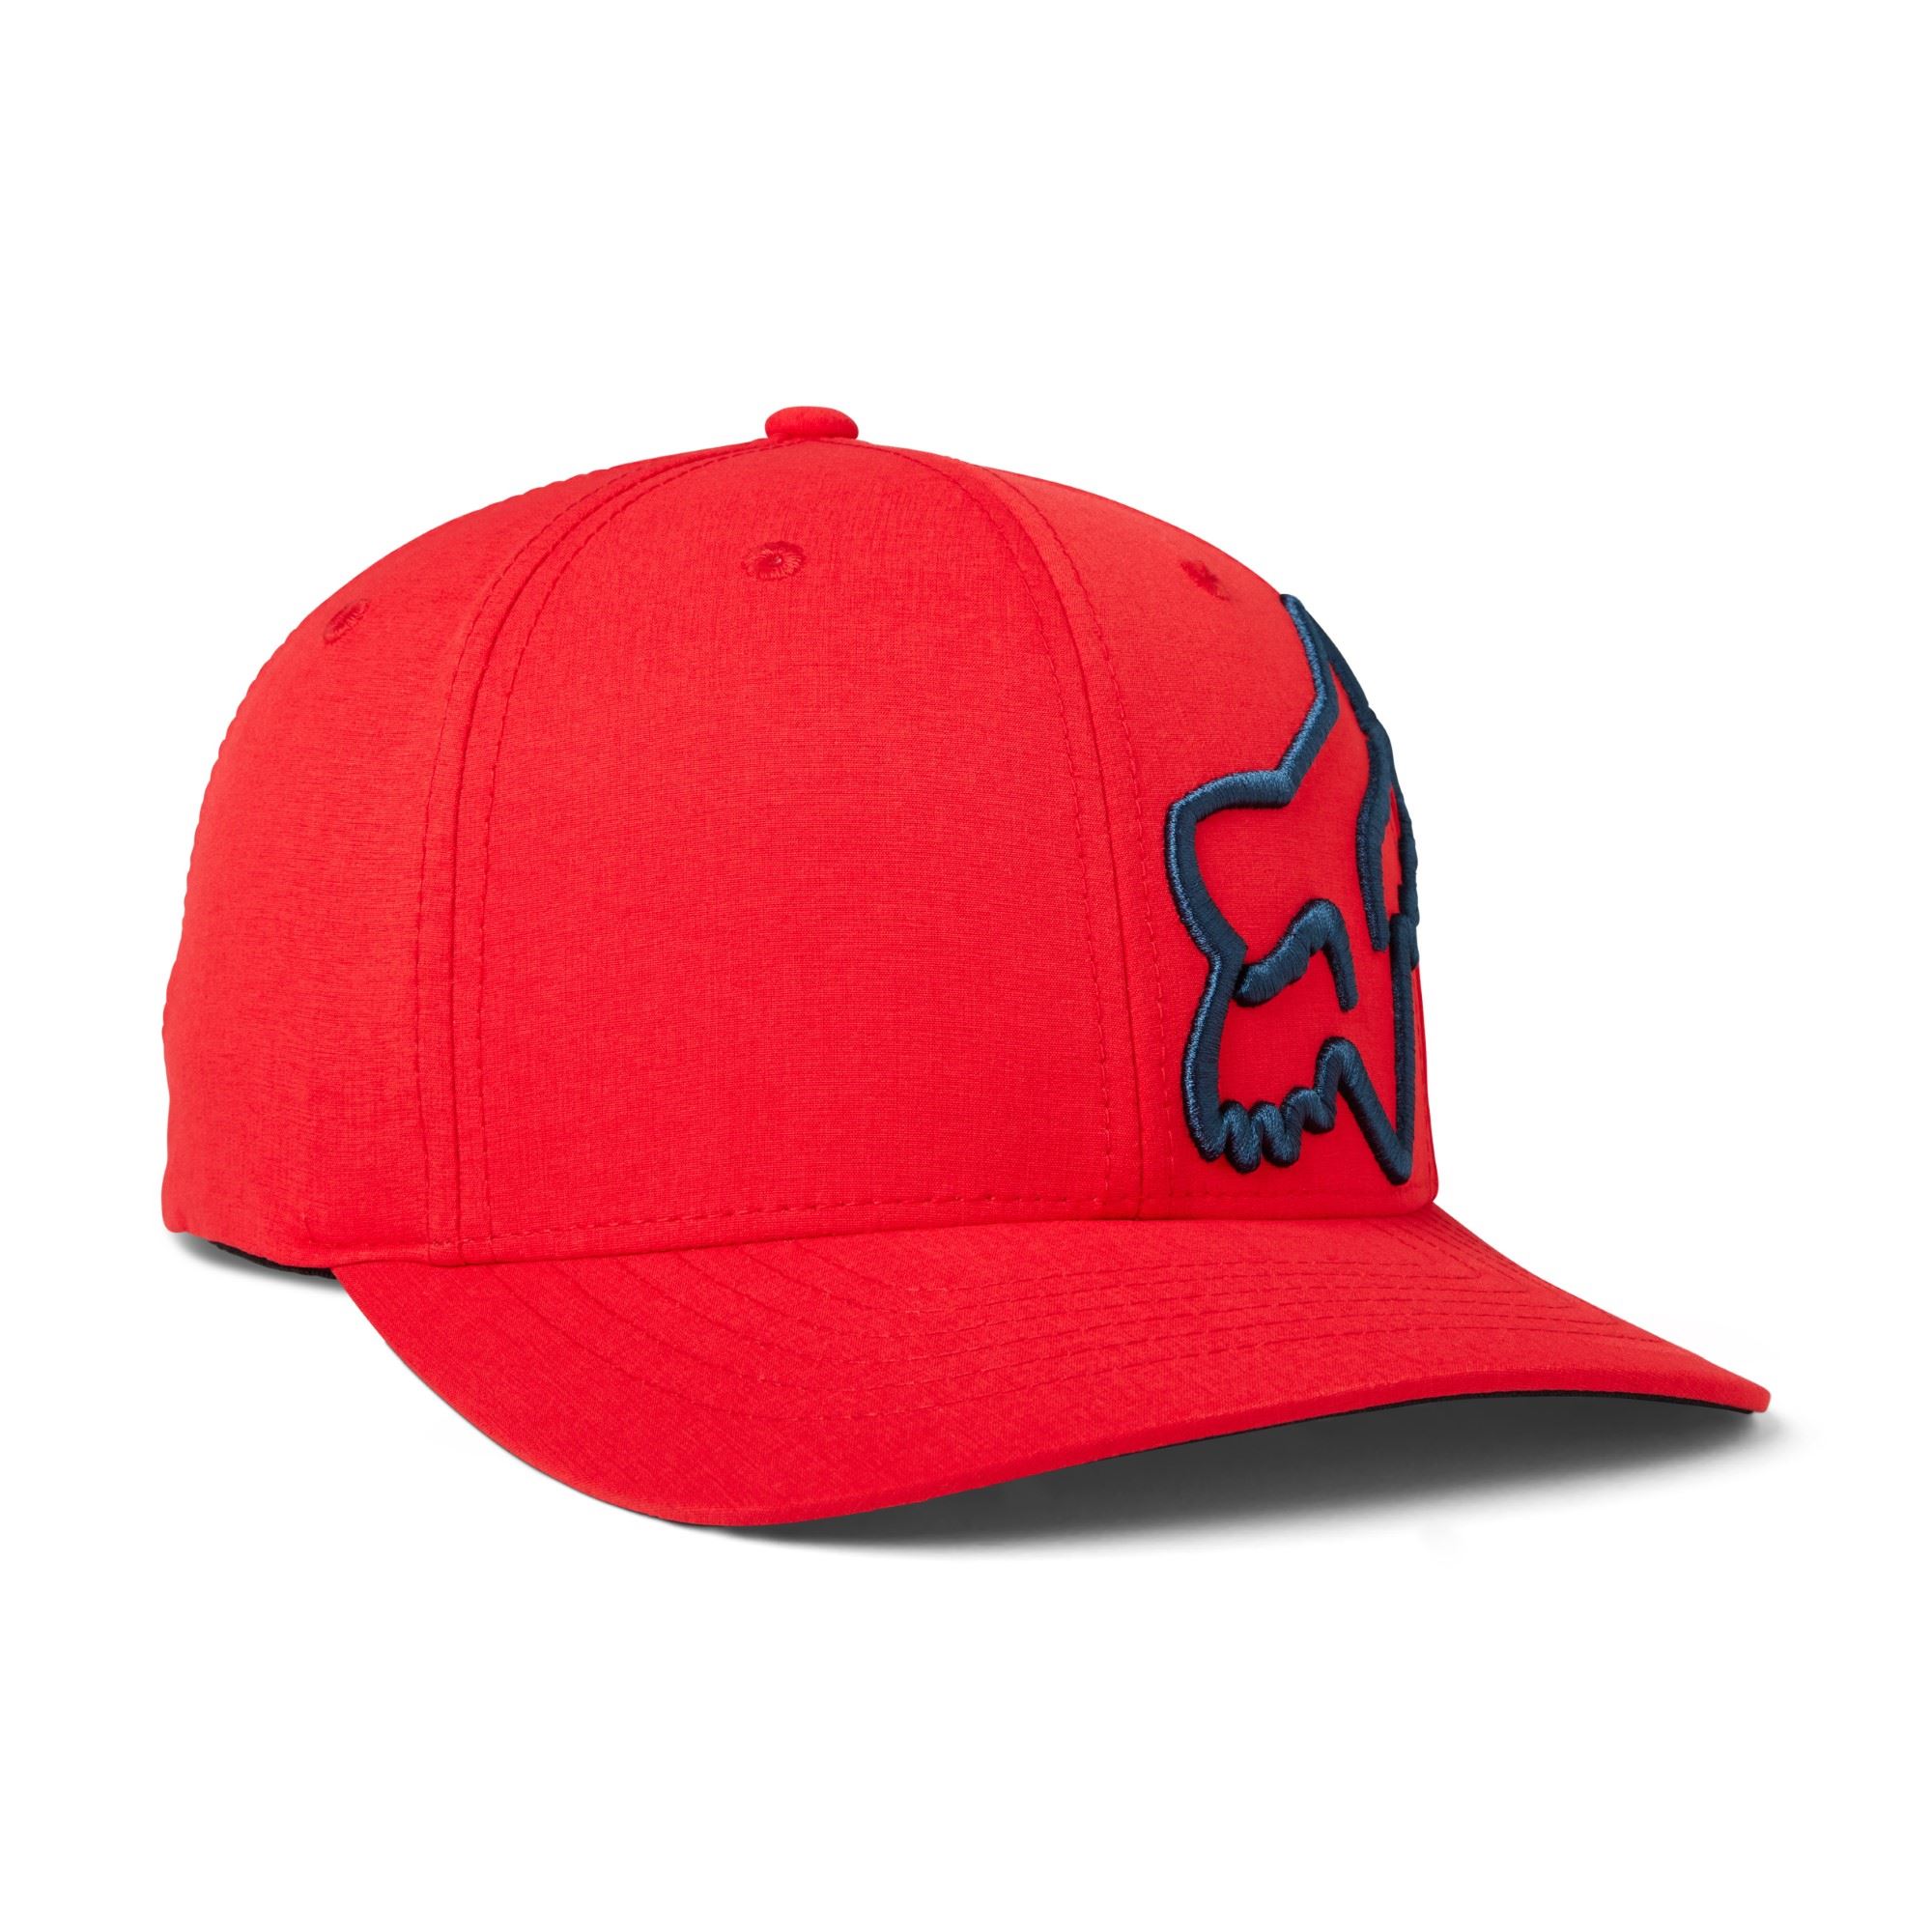 Clouded 2.0 Heather Red Flexfit Hat Fox Racing